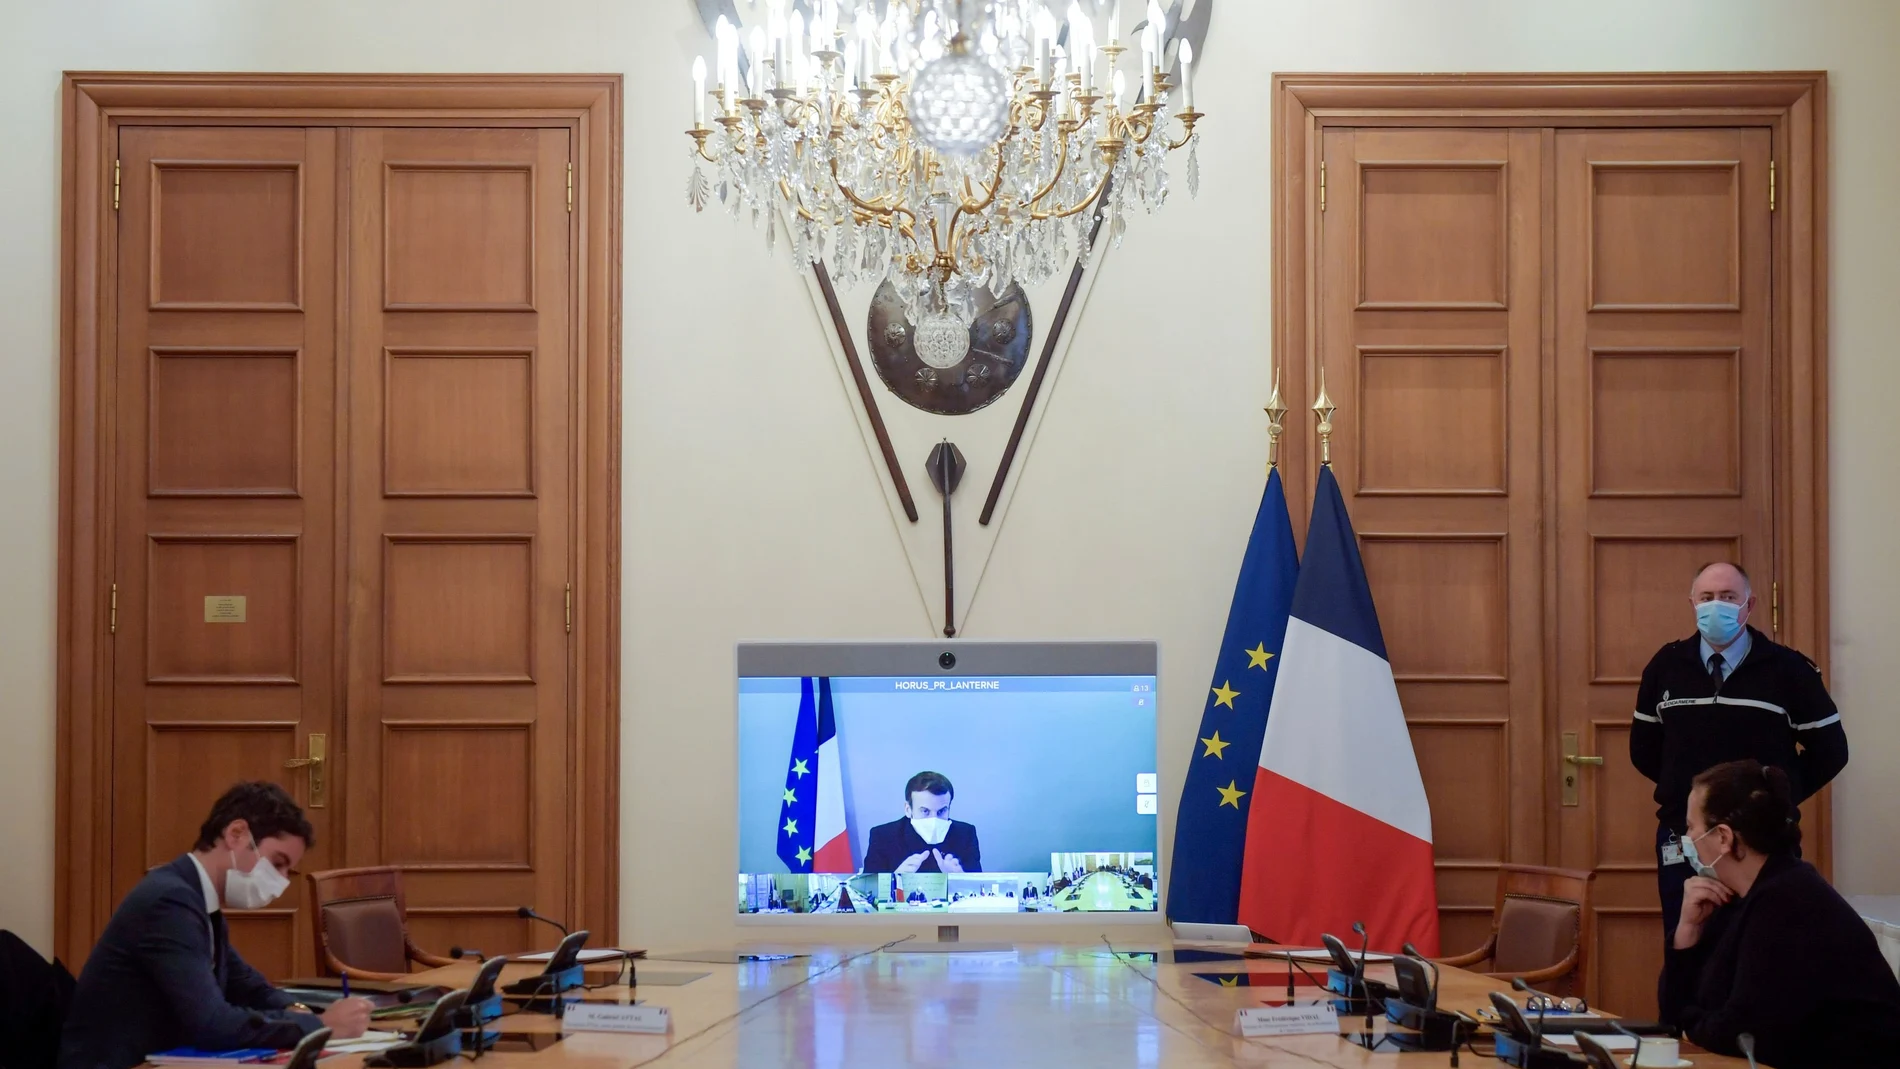 France's President Emmanuel Macron, who tested positive for the coronavirus disease (COVID-19), is seen on a screen as he attends by video conference a round table for the weekly cabinet meeting of the government at the Army Ministry in Paris, France, December 21, 2020. Julien De Rosa/Pool via REUTERS